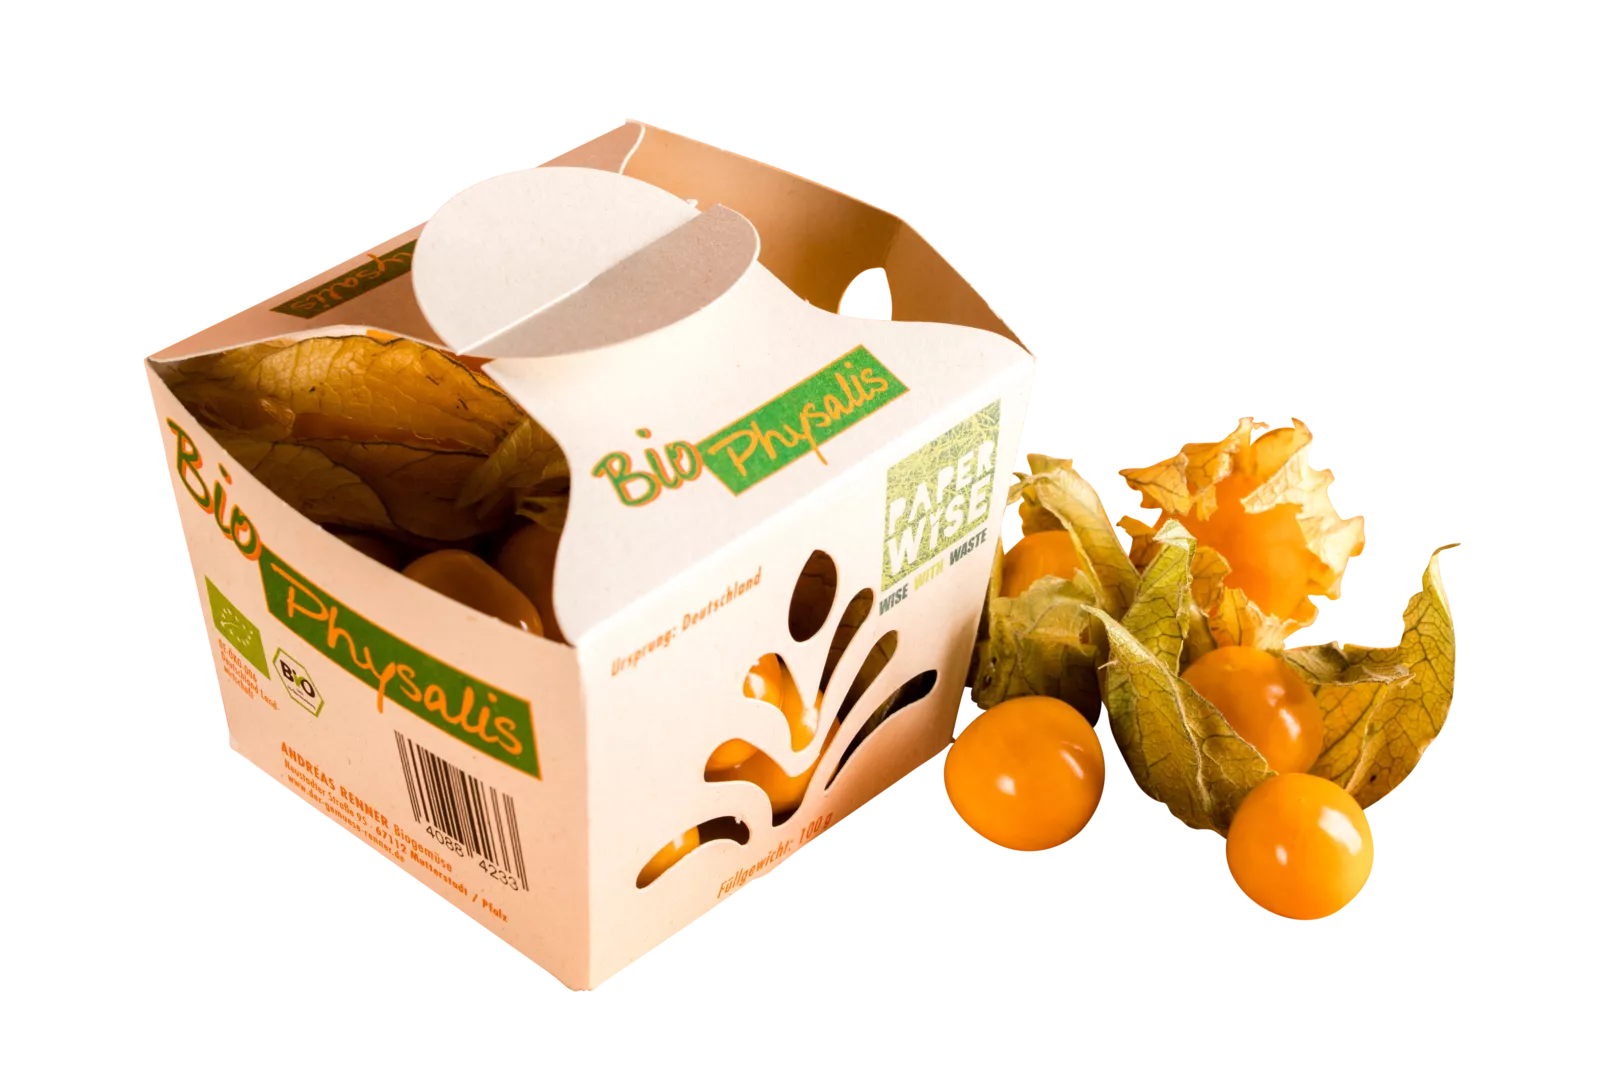 PaperWise eco friendly paper board sustainable packaging compostable food tomatoes softfruits vegetables bio organic supermarkets physalis c